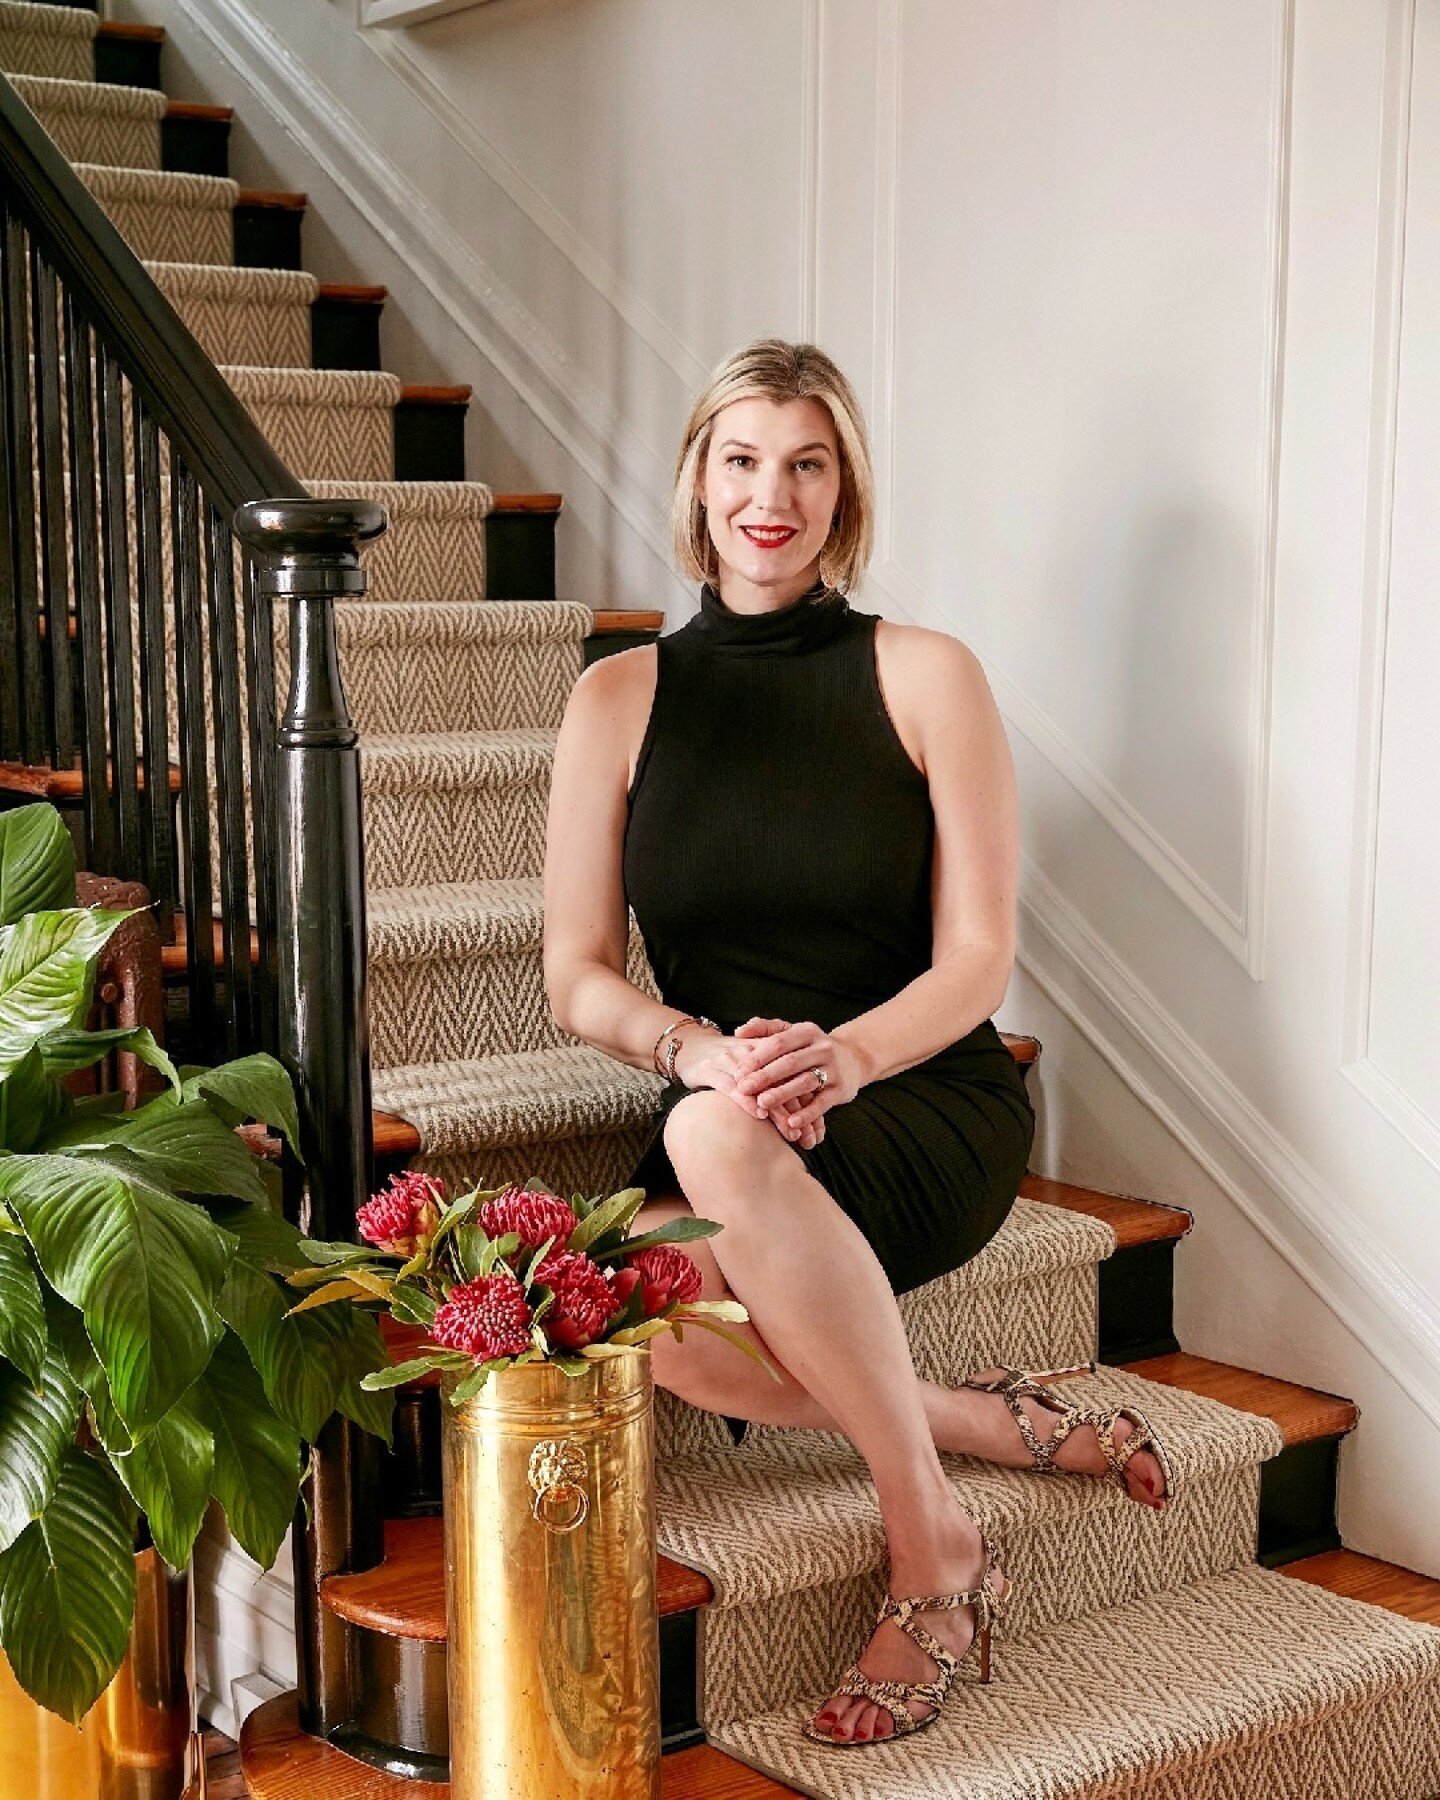 After a nearly 20 year career in fashion, Sarah Storms now brings a trained eye, open heart, and tireless passion to the world of interior design by transforming historic residences into timeless family homes.  She specializes in creating layered, en